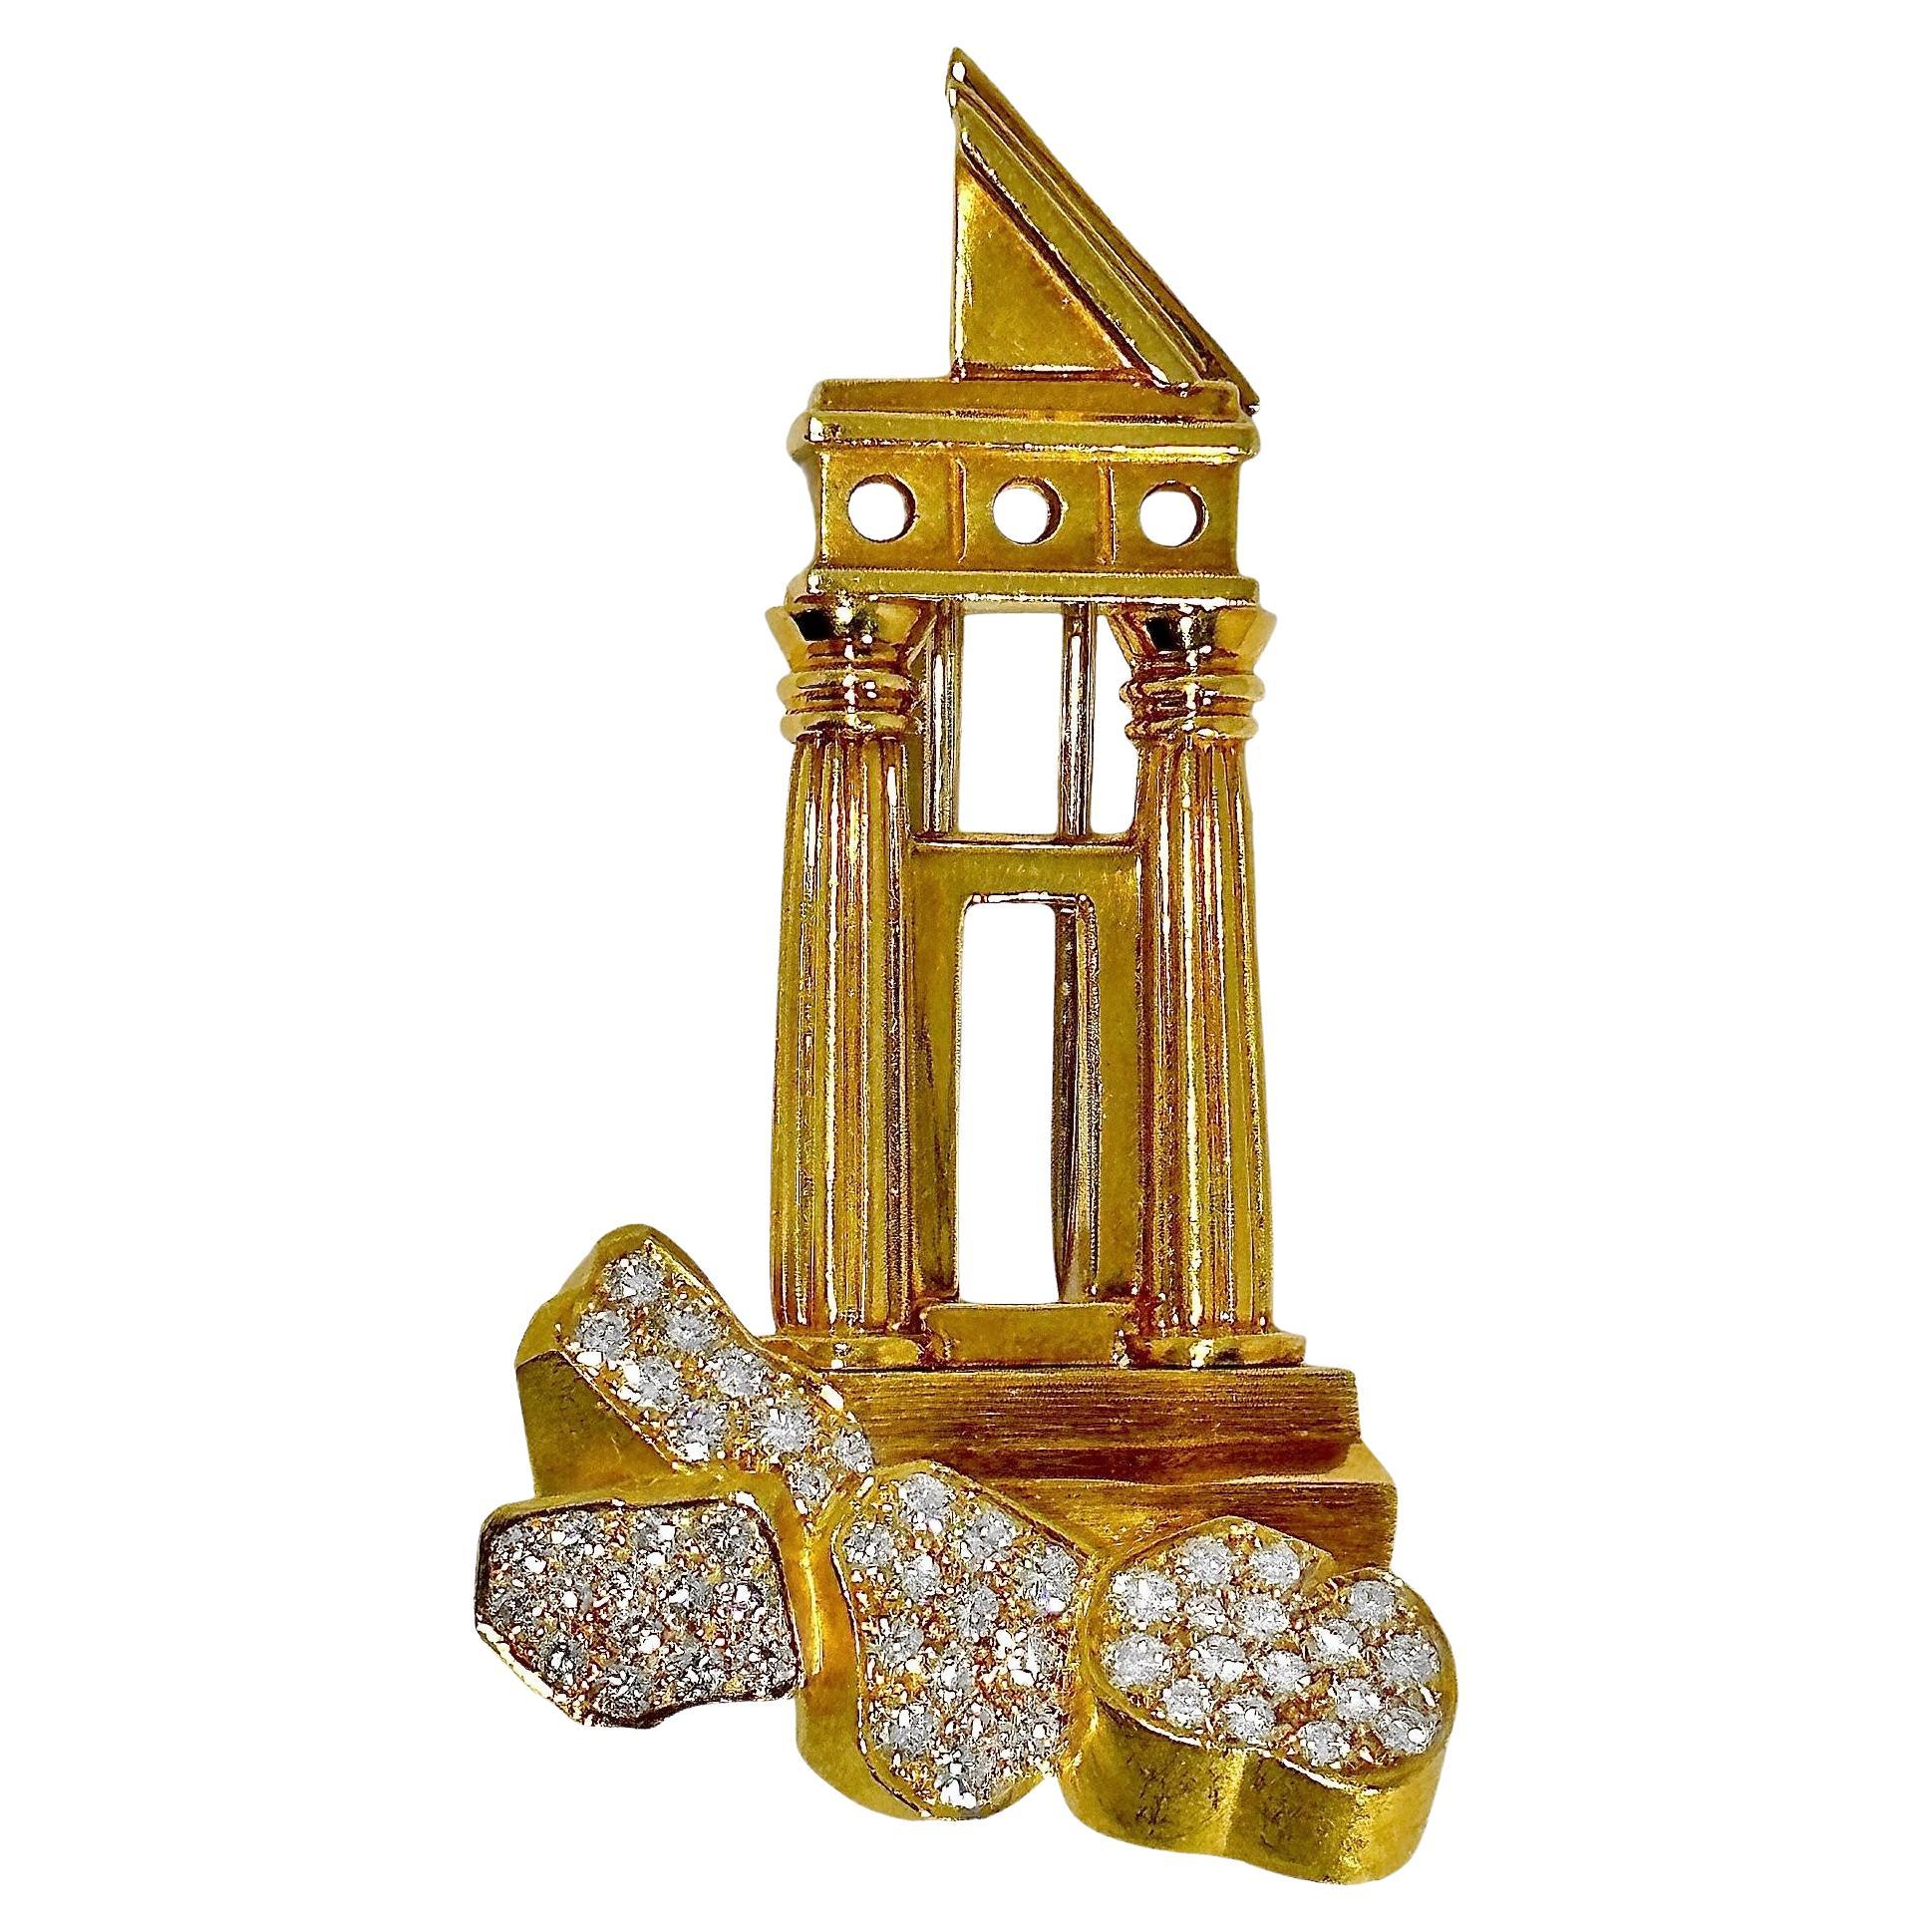 Vintage Dunay Architectural Brooch in 18k Gold and Diamonds